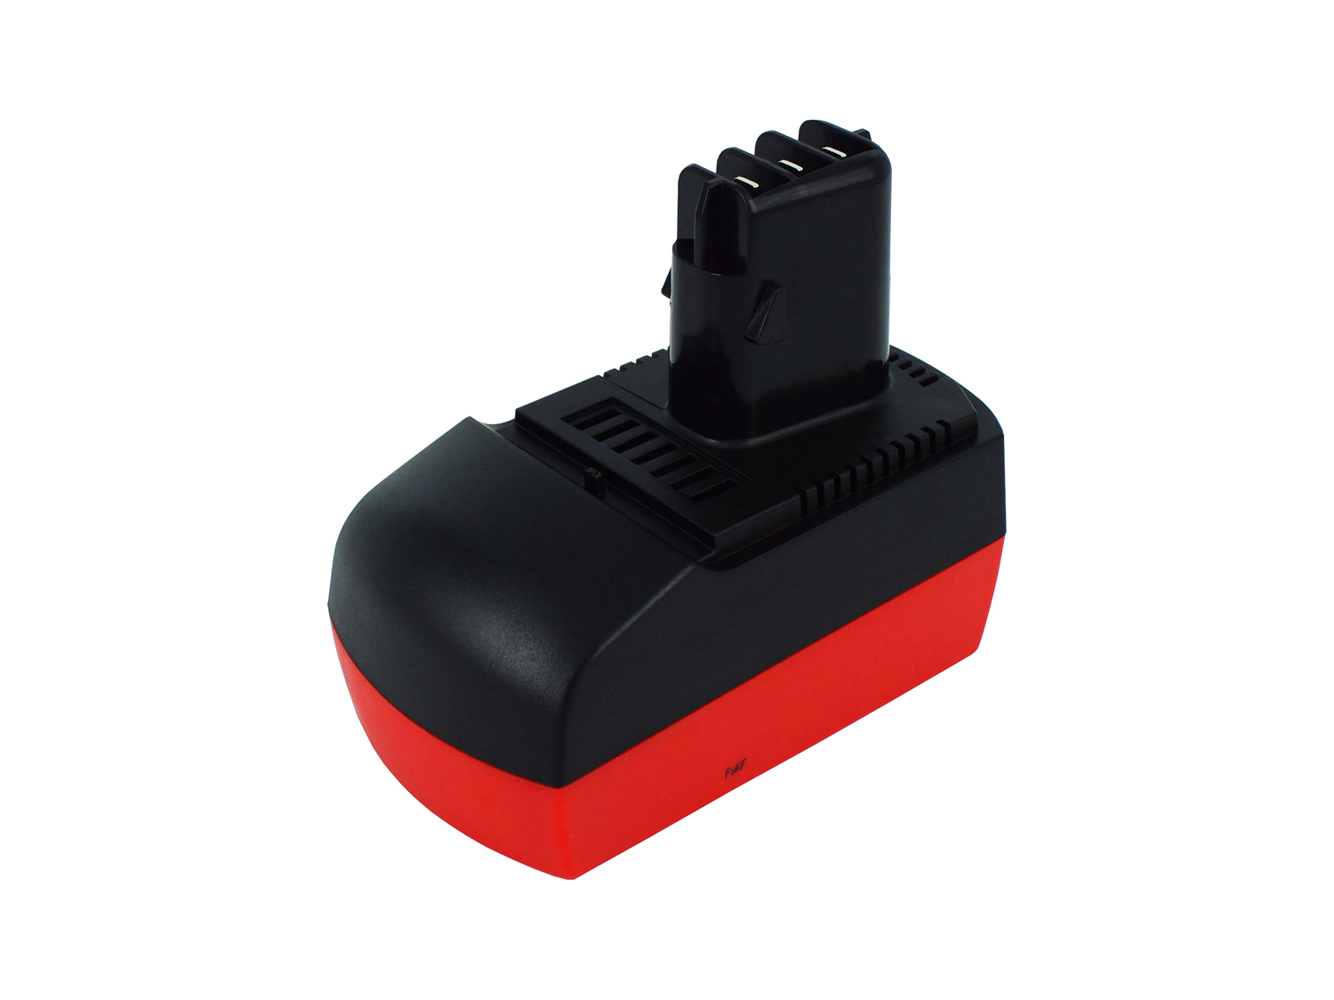 Metabo 6.25475, 6.25476 Power Tool Battery For Bsz 14.4, Bsz 14.4 Impuls replacement